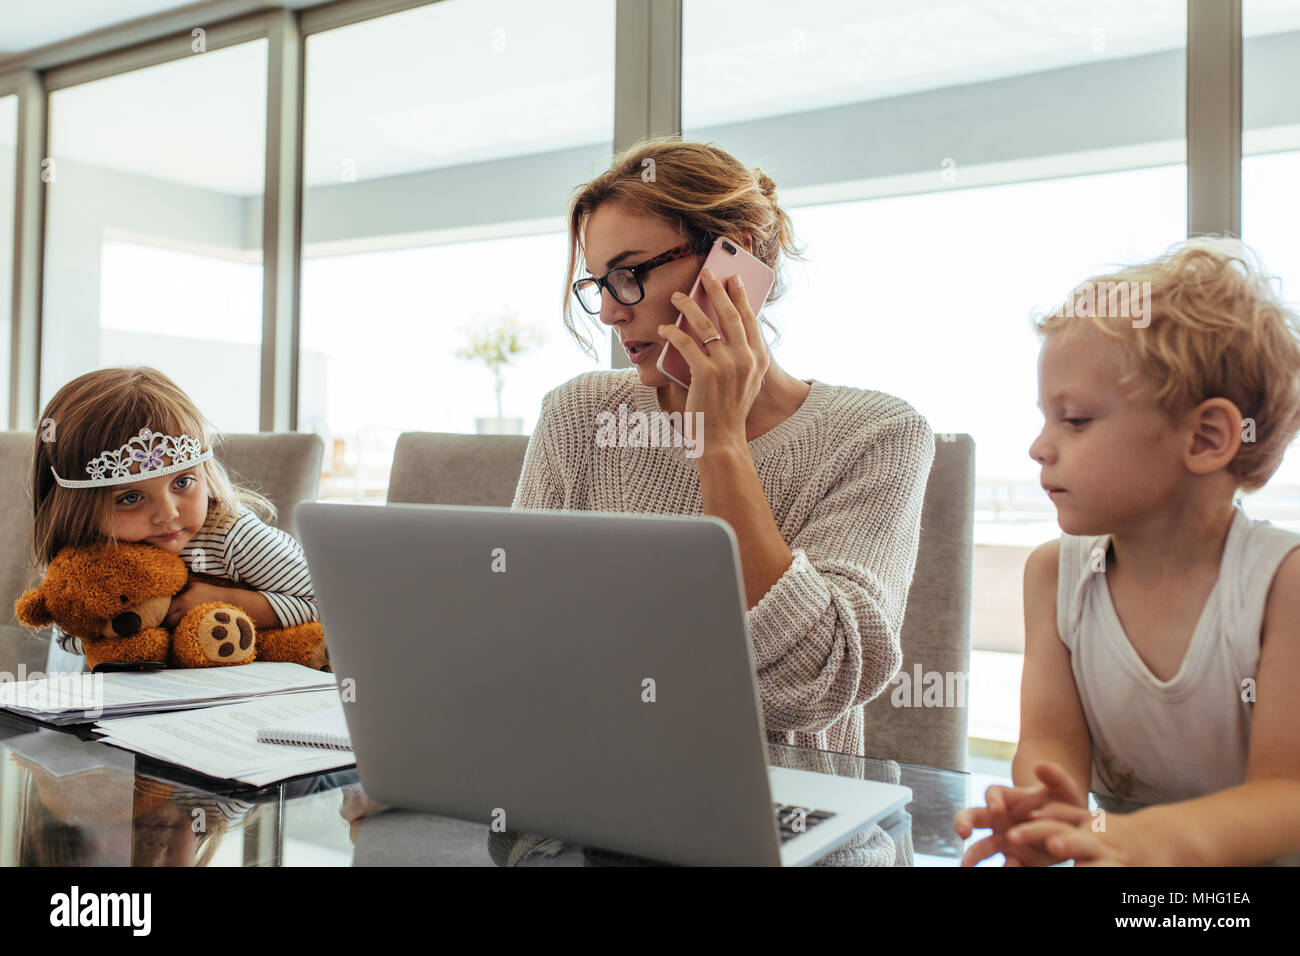 Young woman talking on mobile phone while sitting at tablet with laptop and her kids. Mother working from home with her children sitting by. Stock Photo